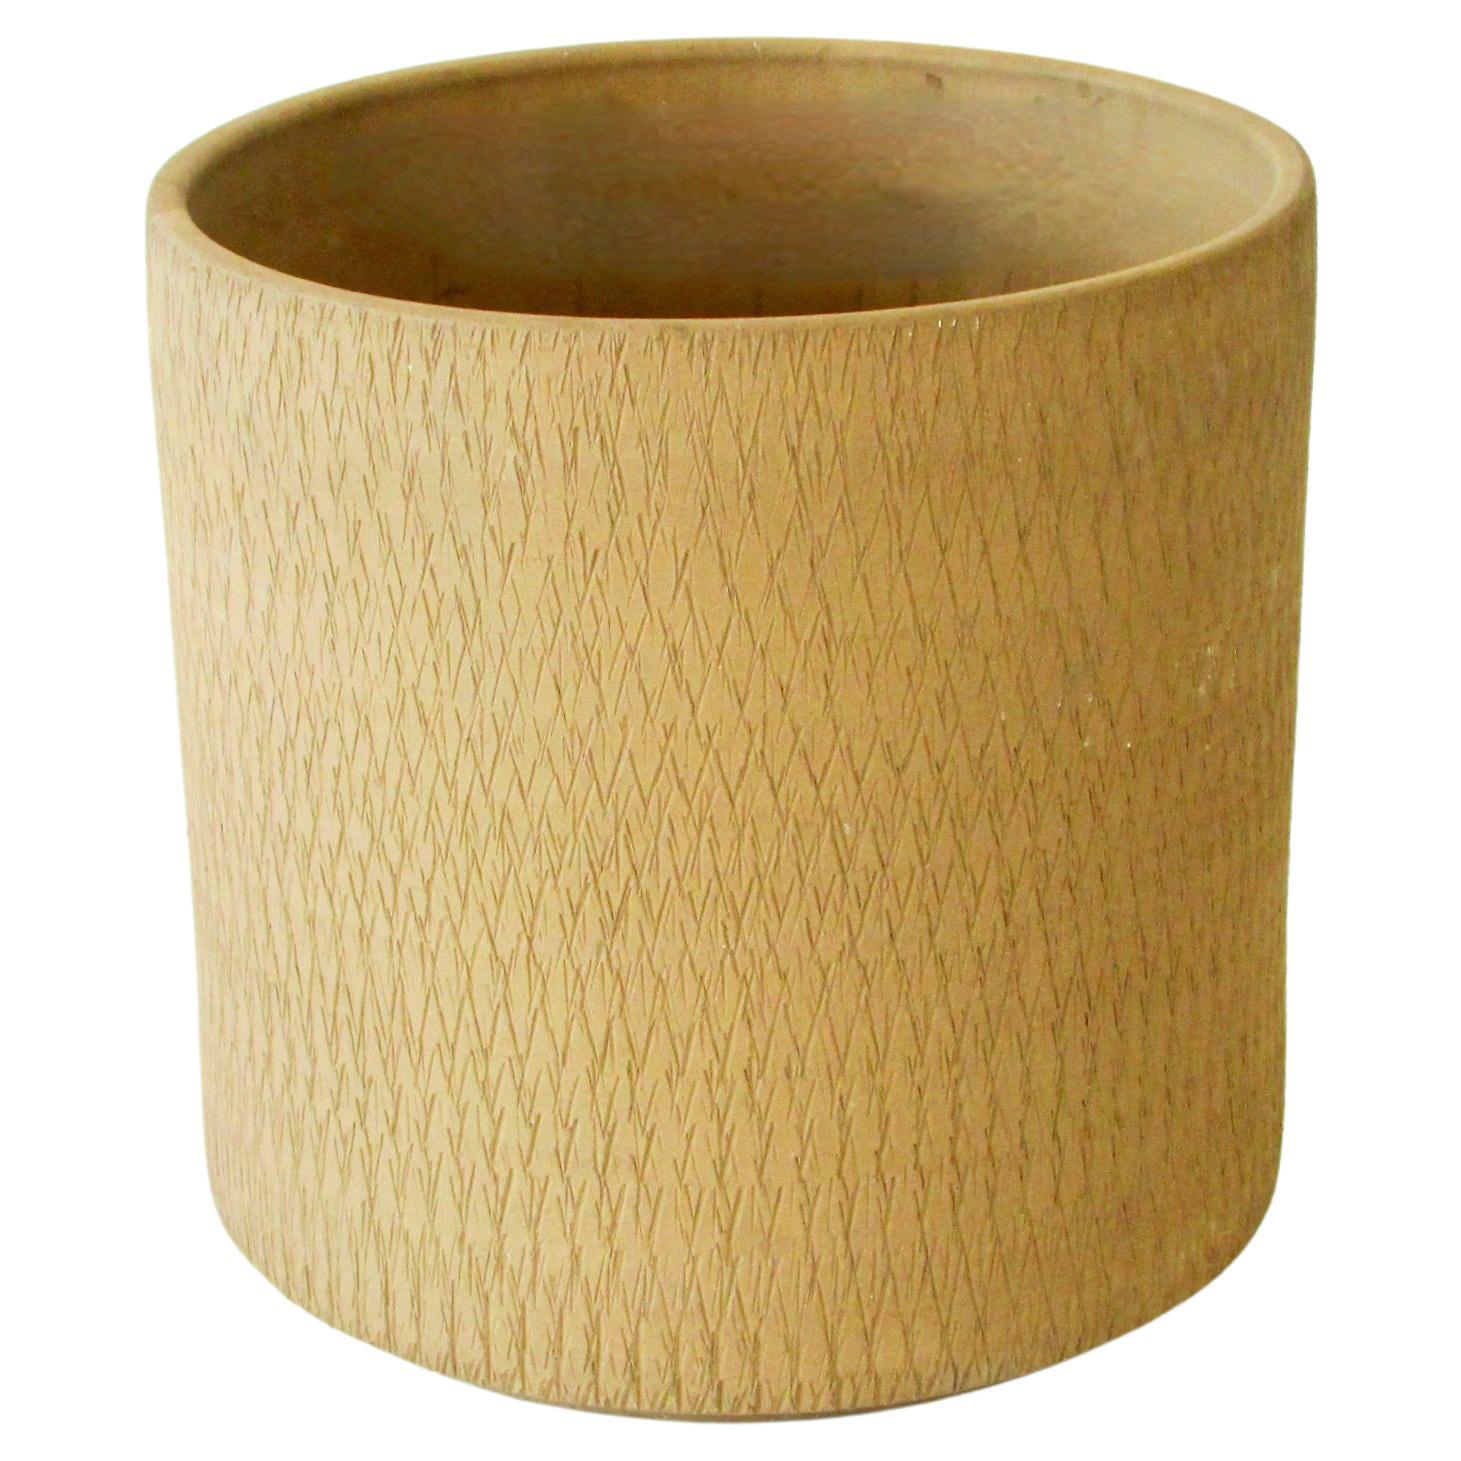 Large Earth Tone Gainey Planter Pot with Organic Sgrafitto Design